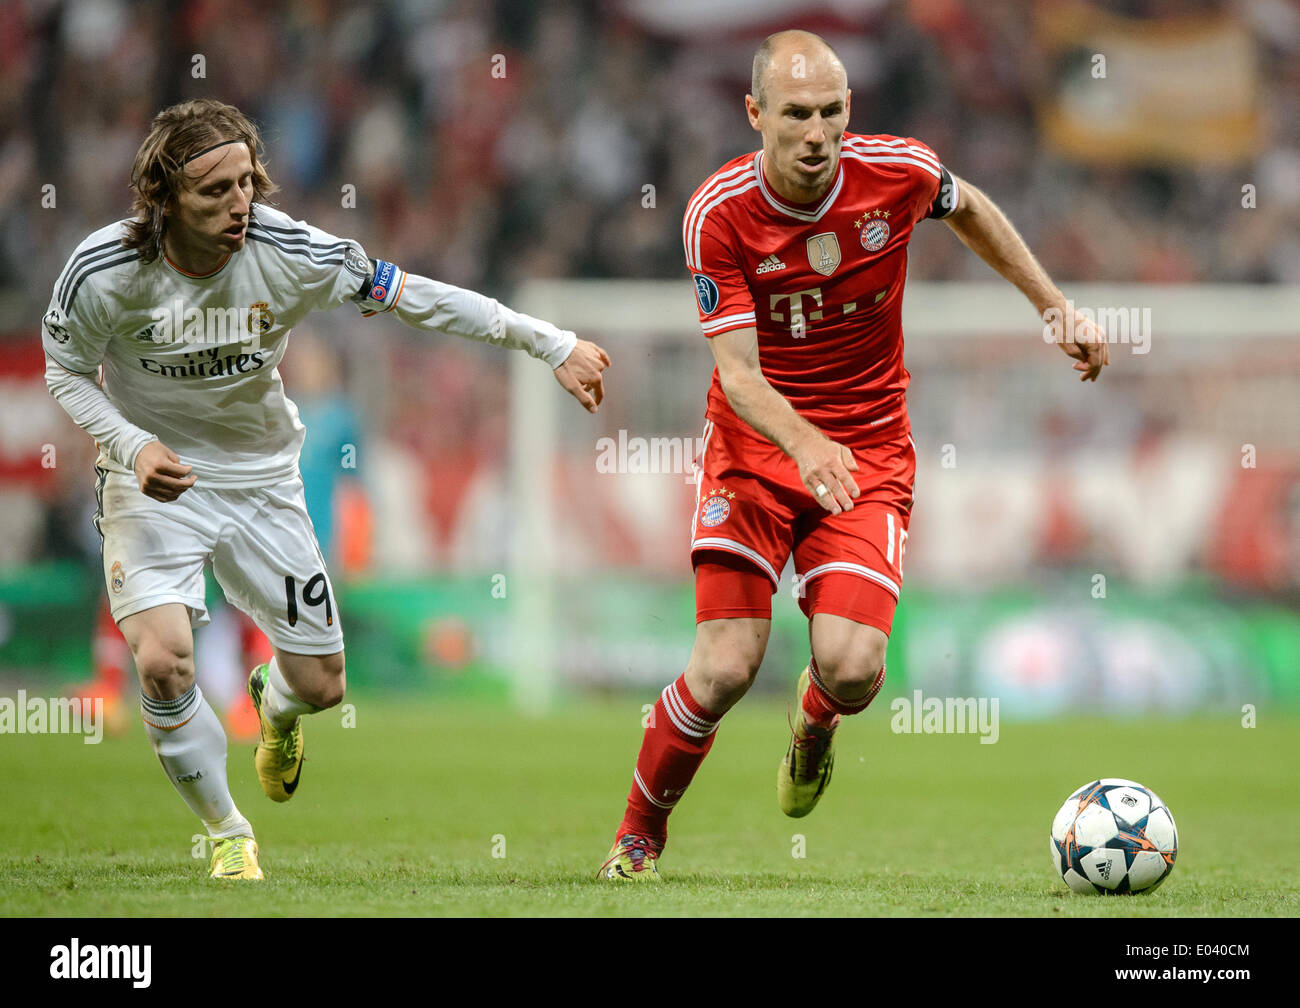 Munich, Germany. 29th Apr, 2014. Madrid's Fabio Coentrao (L) in action against Munich's Luka Modric during the Champions League semifinal second leg match between Bayern Munich and Real Madrid at Allianz Arena in Munich, Germany, 29 April 2014. Photo: Thomas Eisenhuth/dpa - NO WIRE SERVICE/dpa/Alamy Live News Stock Photo